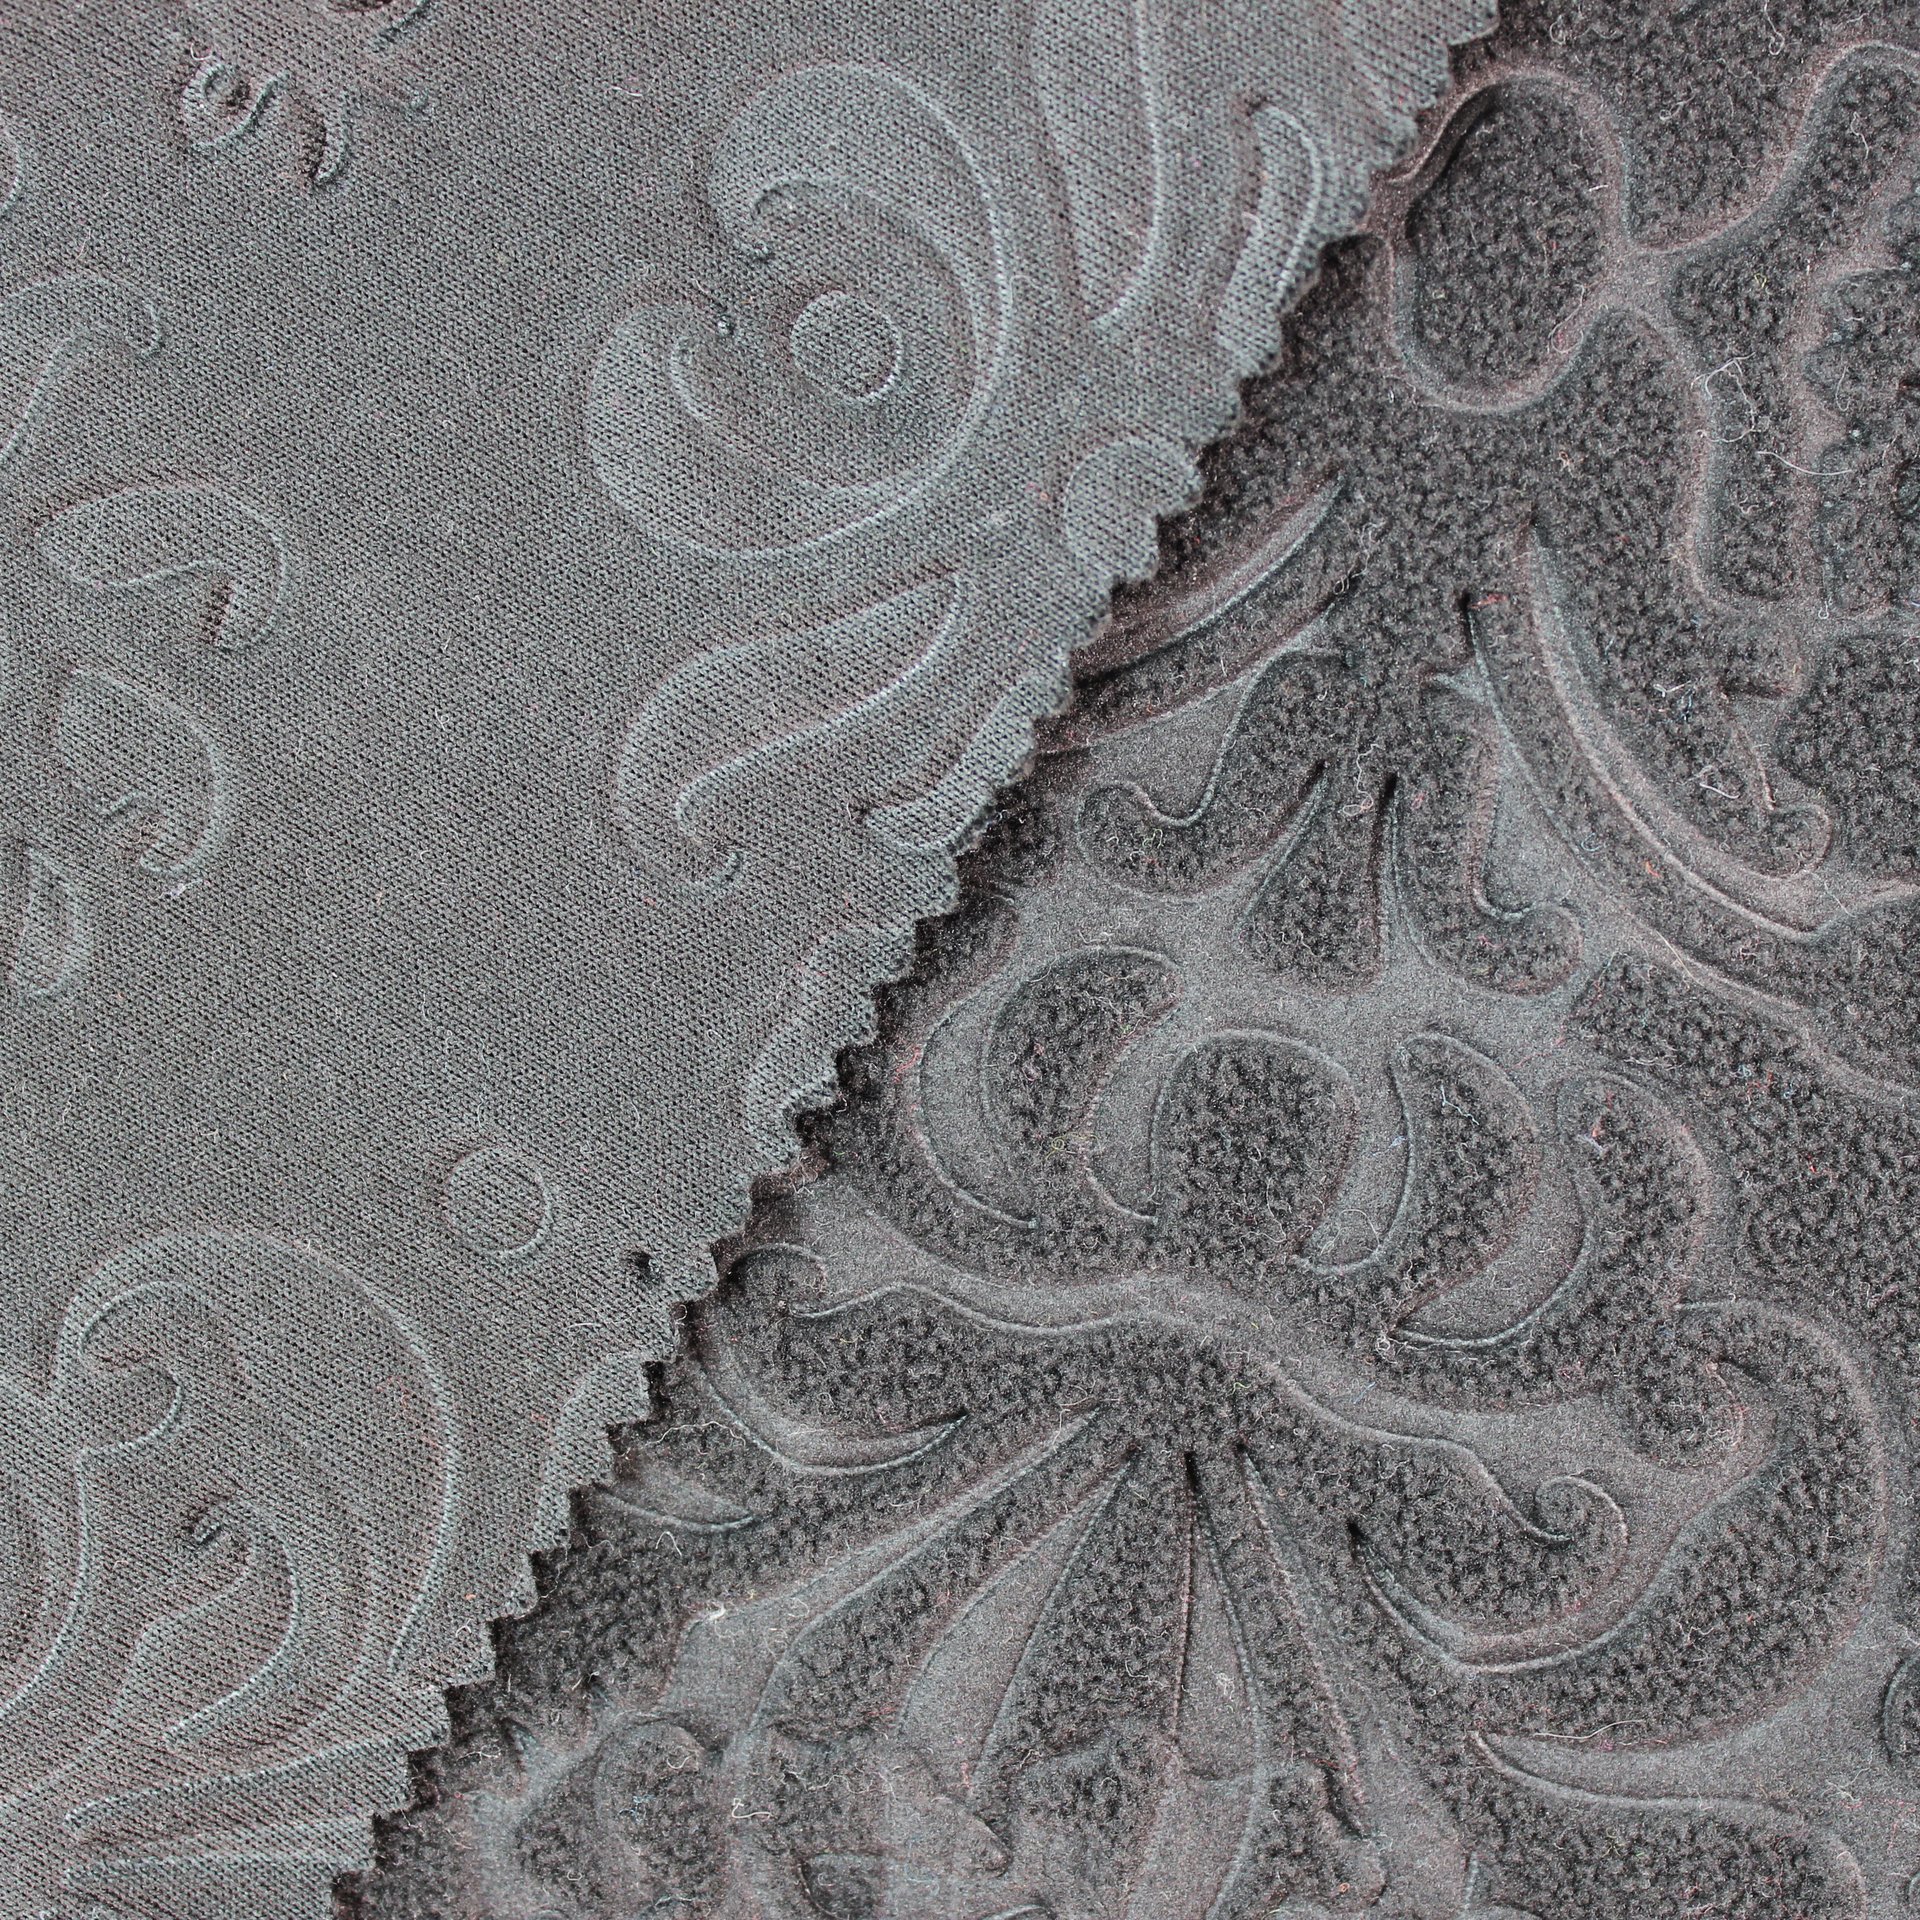 after-Finish embossed fabric